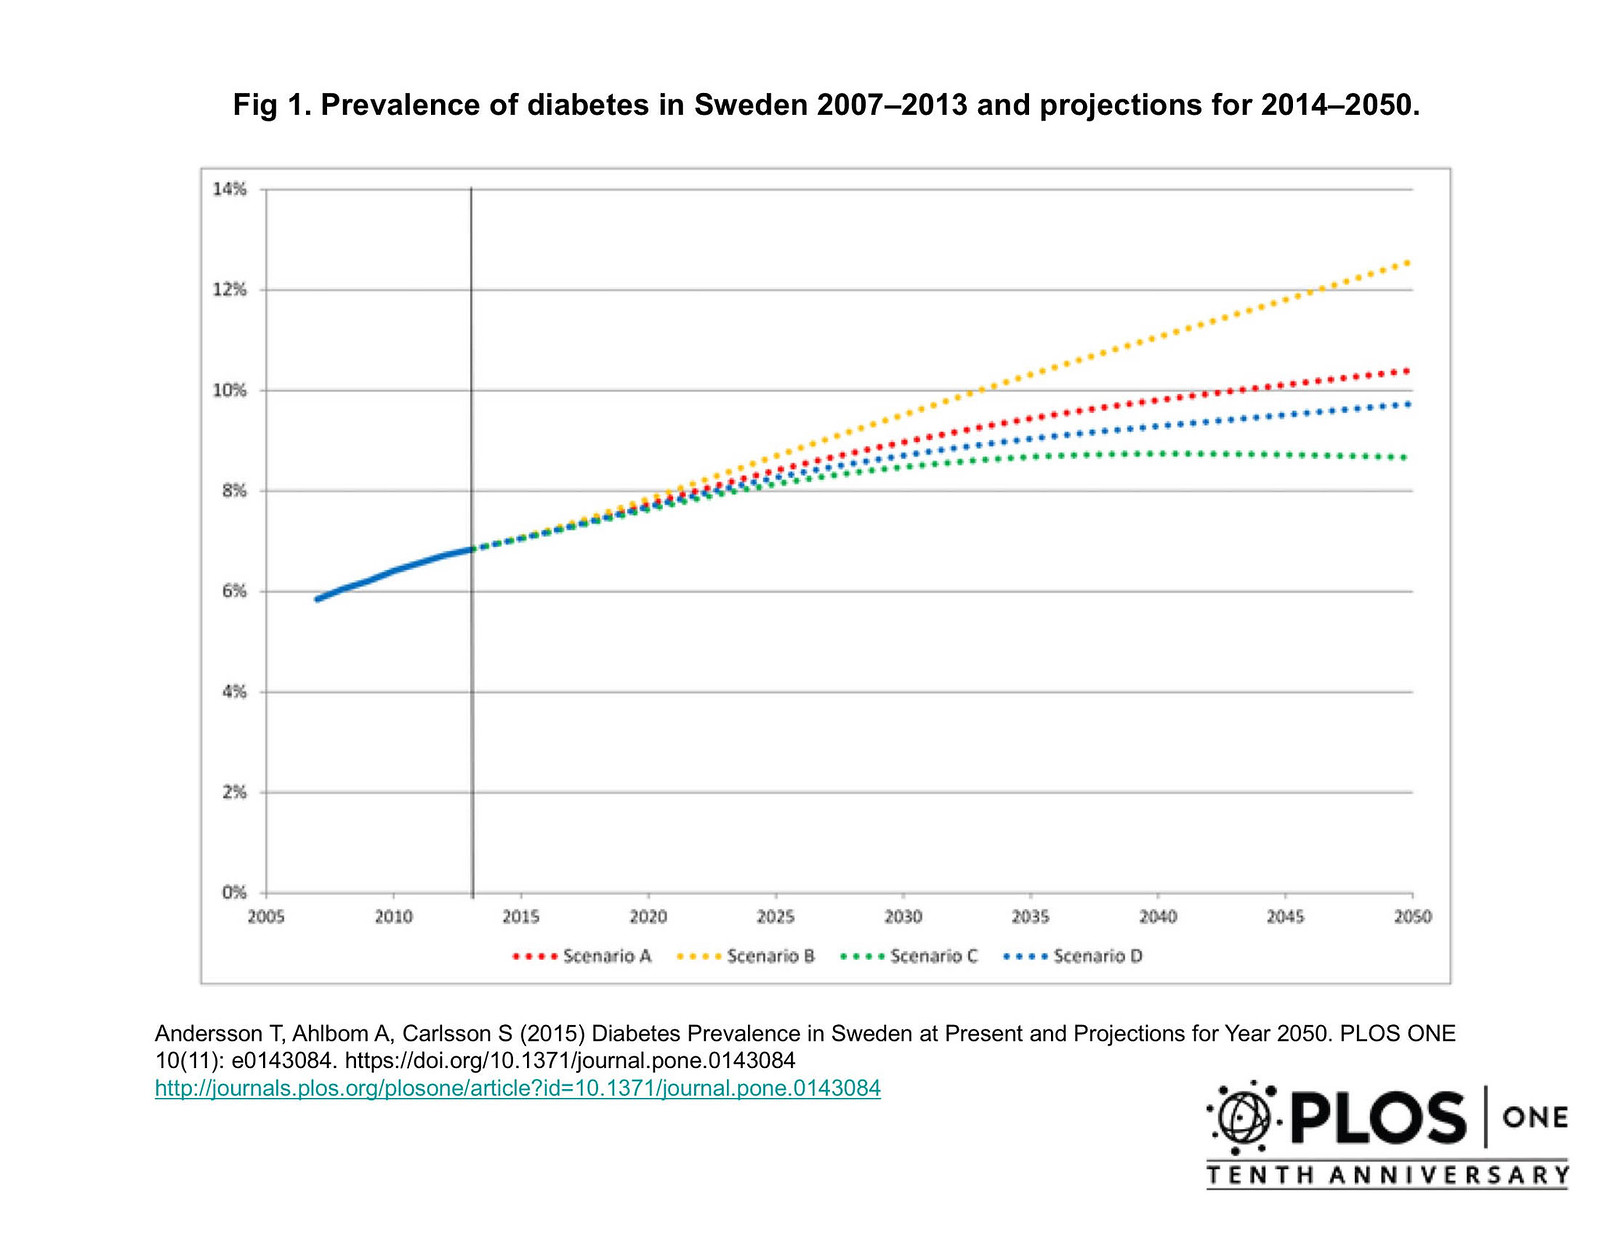 Diabetes Prevalence in Sweden at Present and Projections for Year 2050